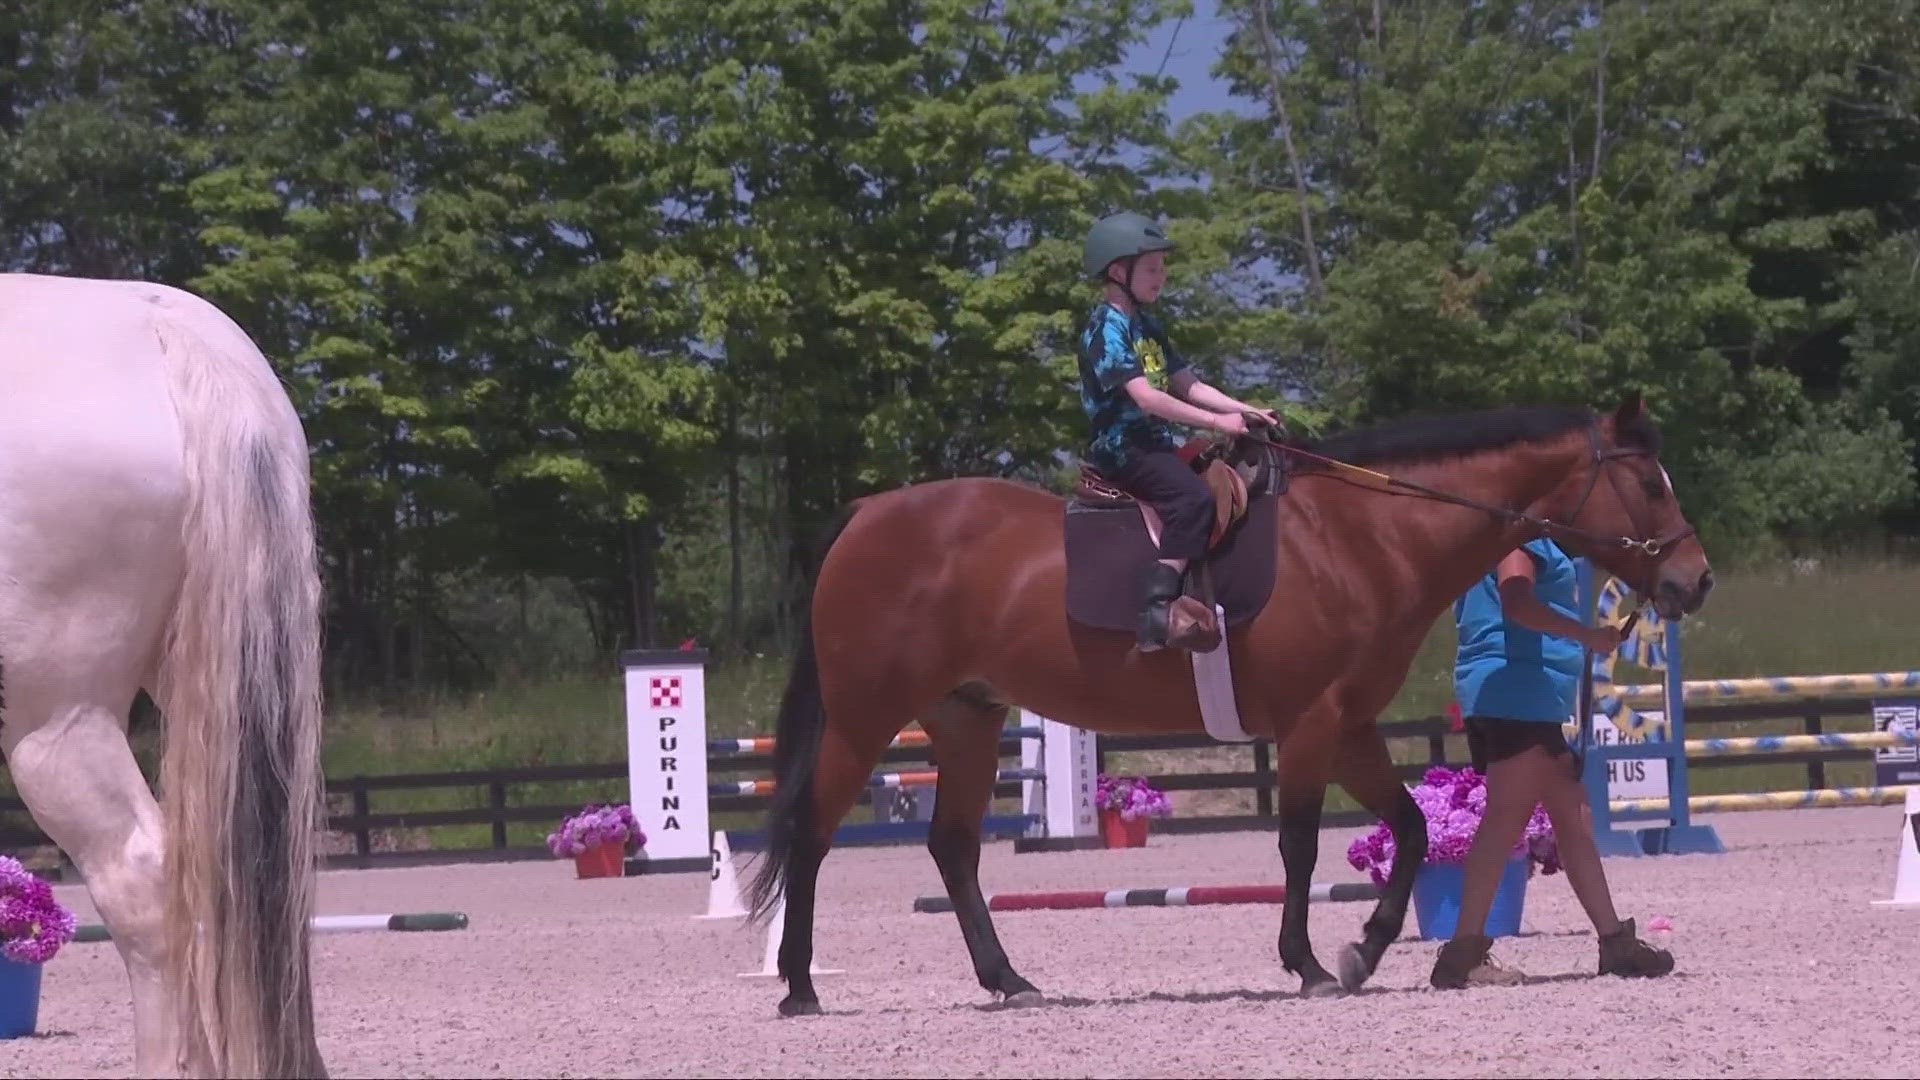 The Riders with Disabilities horseshow is for everyone, no matter your age, challenge or skill-level.